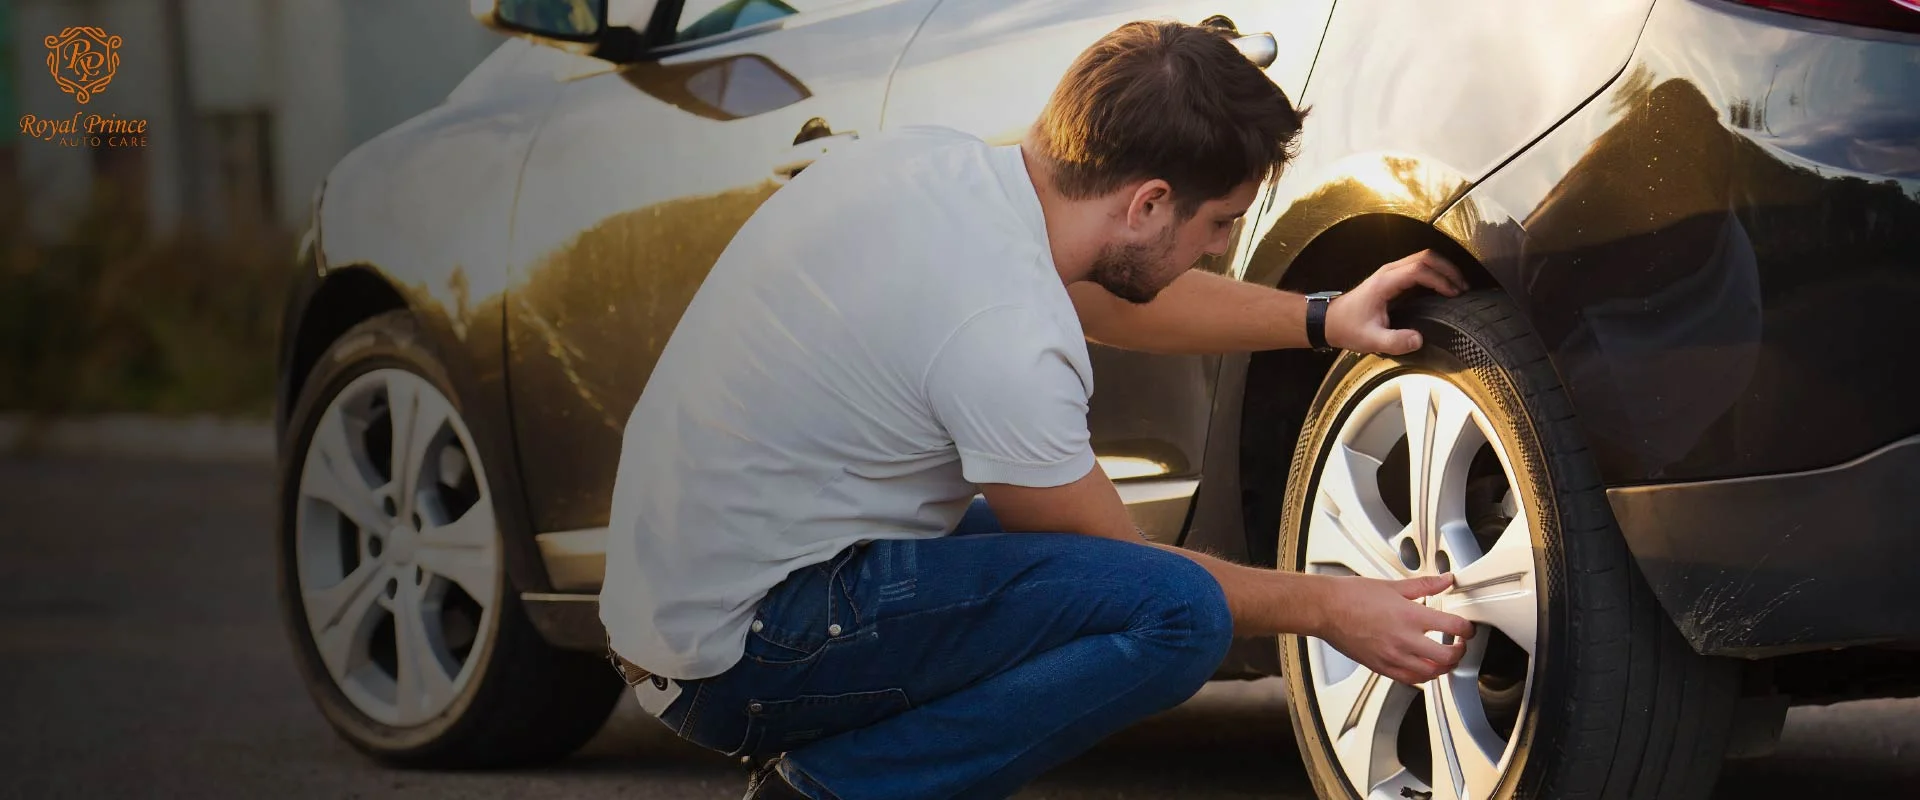 Emergency Tyre Change_ What to Do When You Have a Flat Tyre on the Road